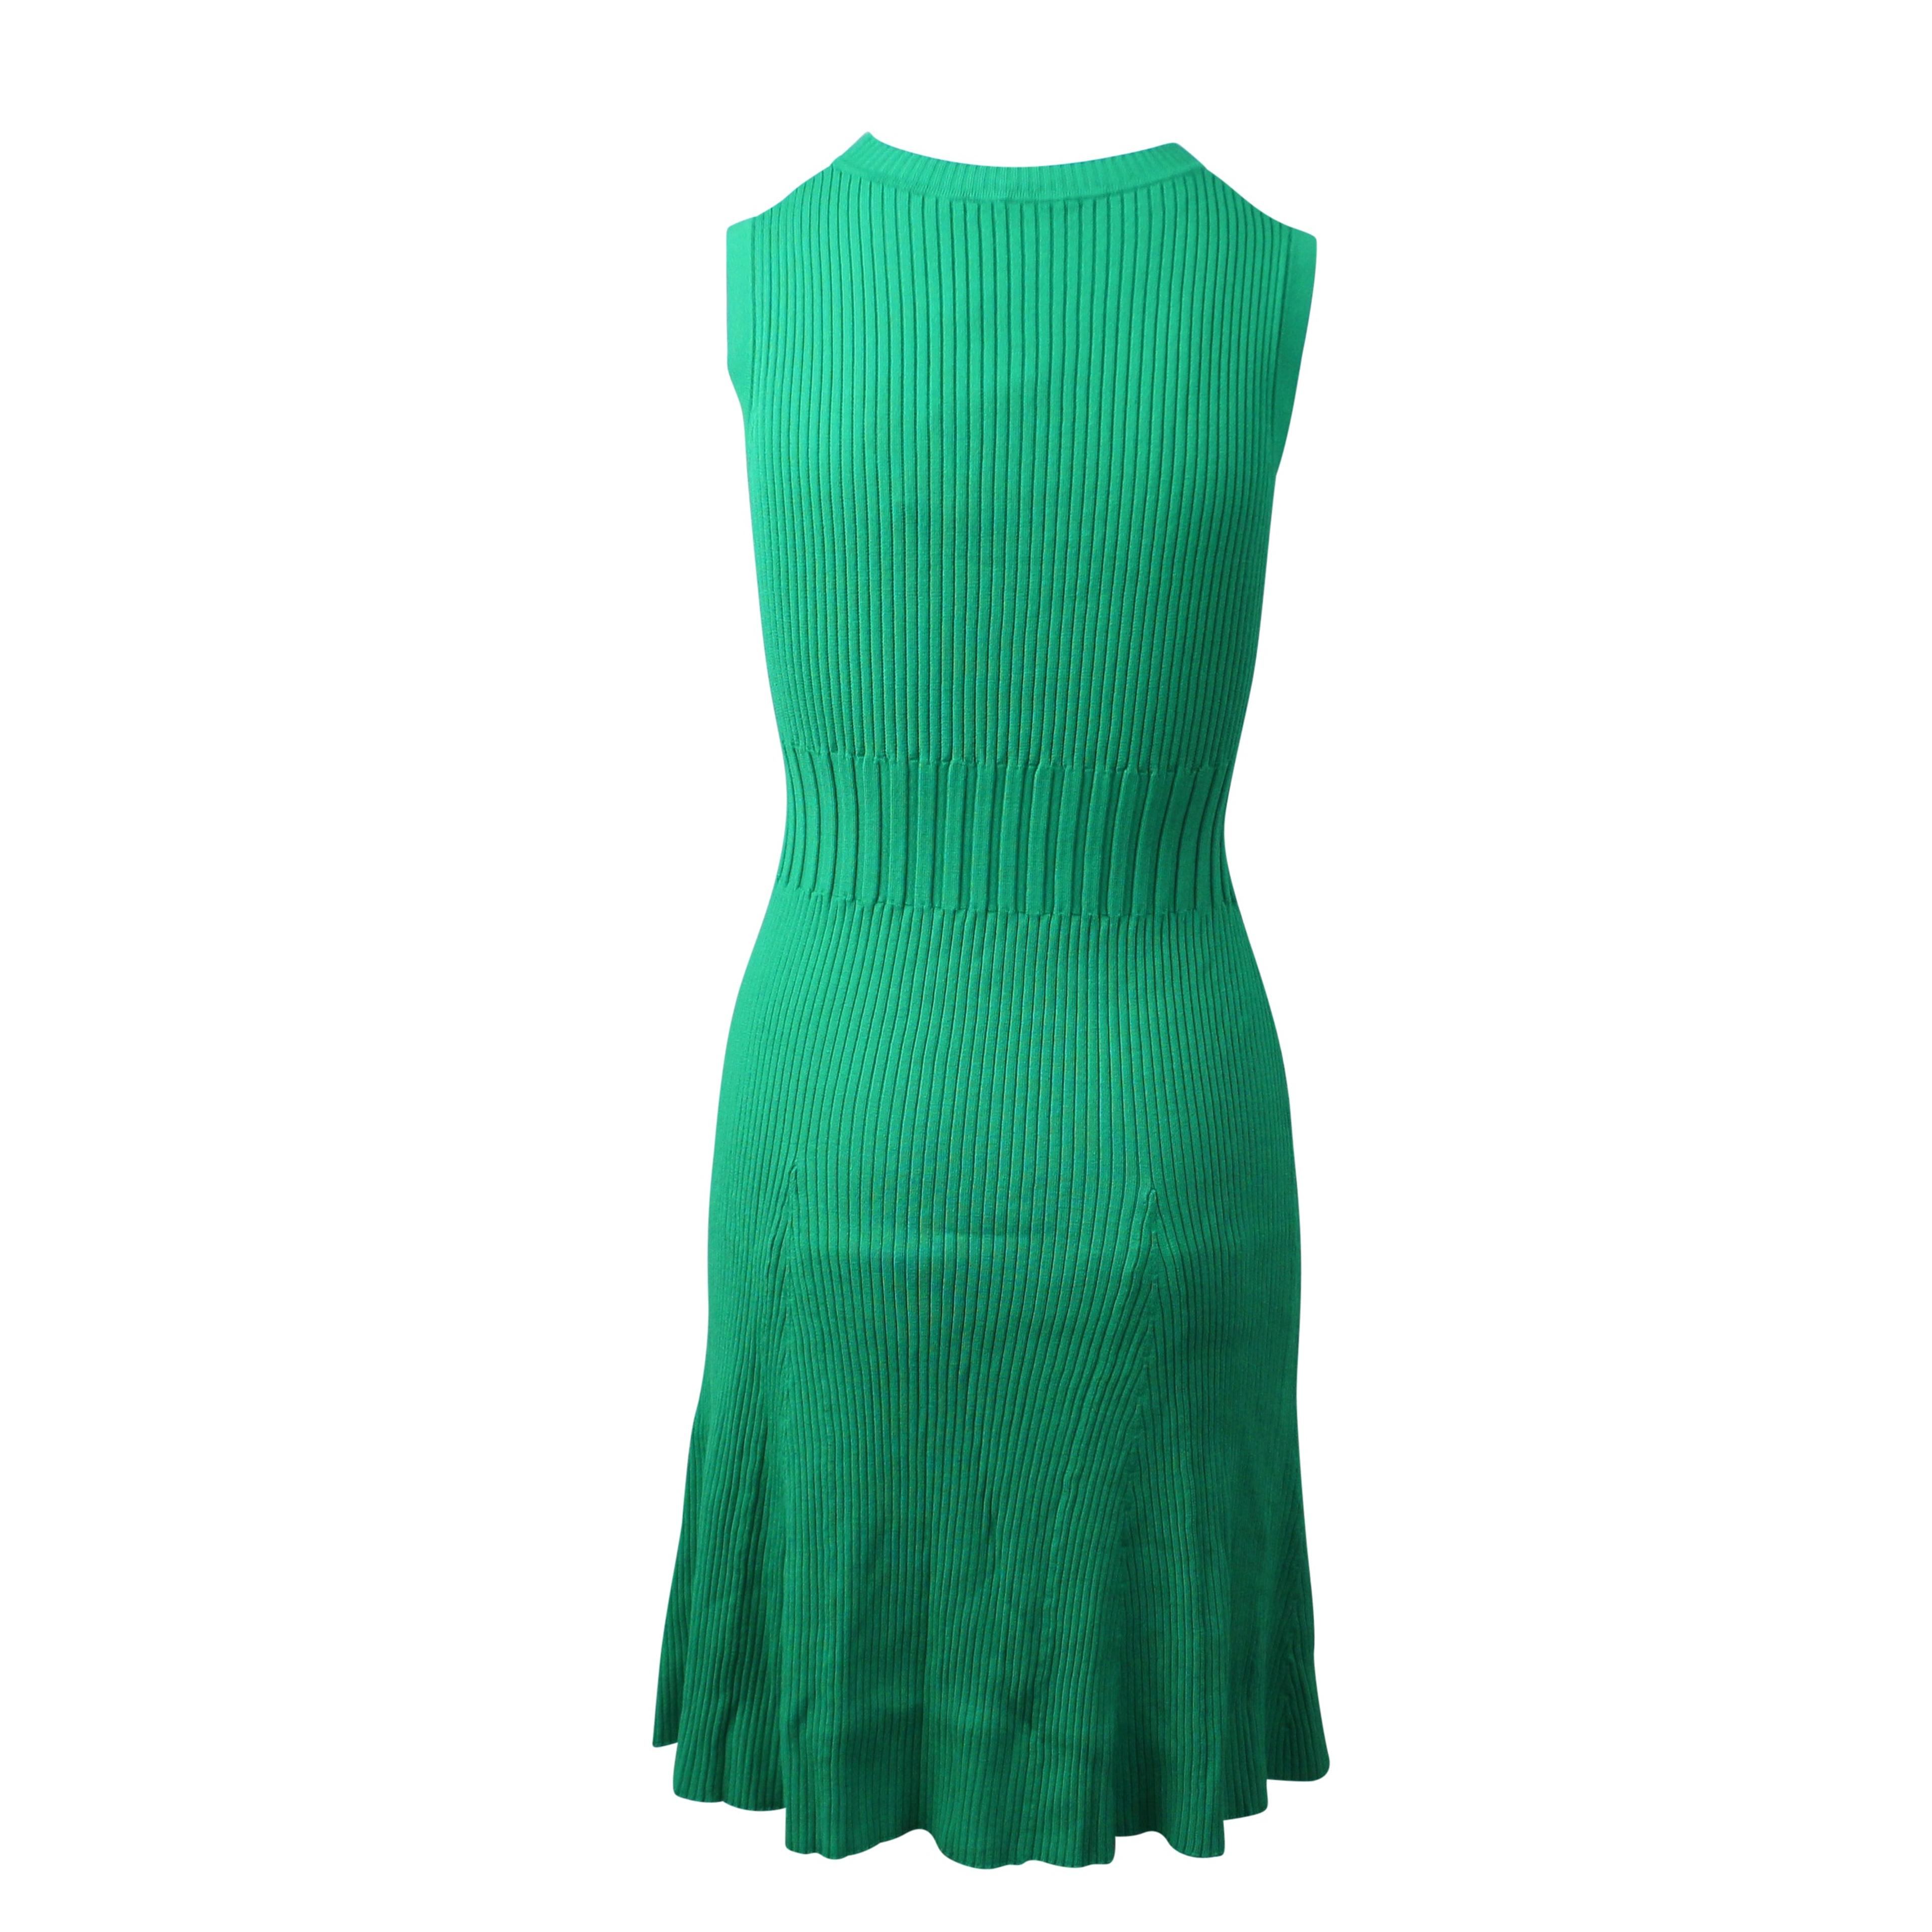 Alternate View 3 of Green Rib Knit Fit And Flare Dress